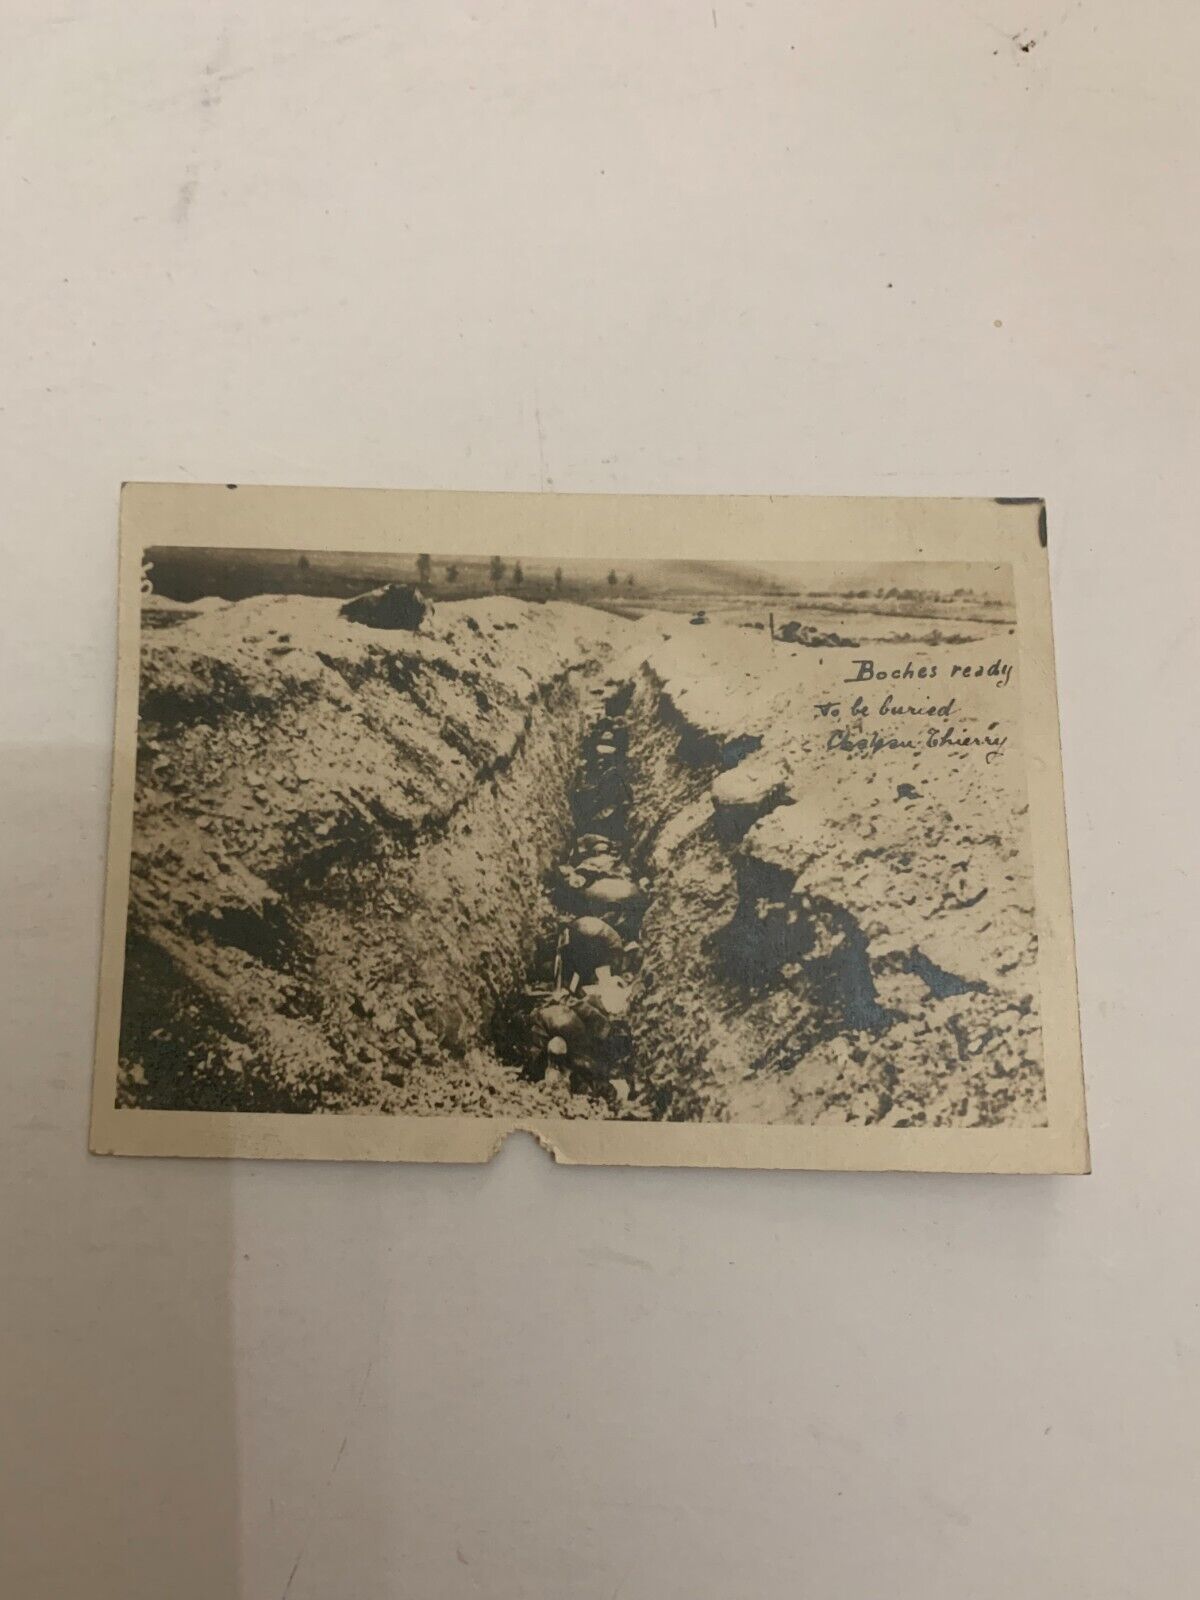 WWI Beaches Ready To Be Buried Chateau Thierry France Black and White Photograph